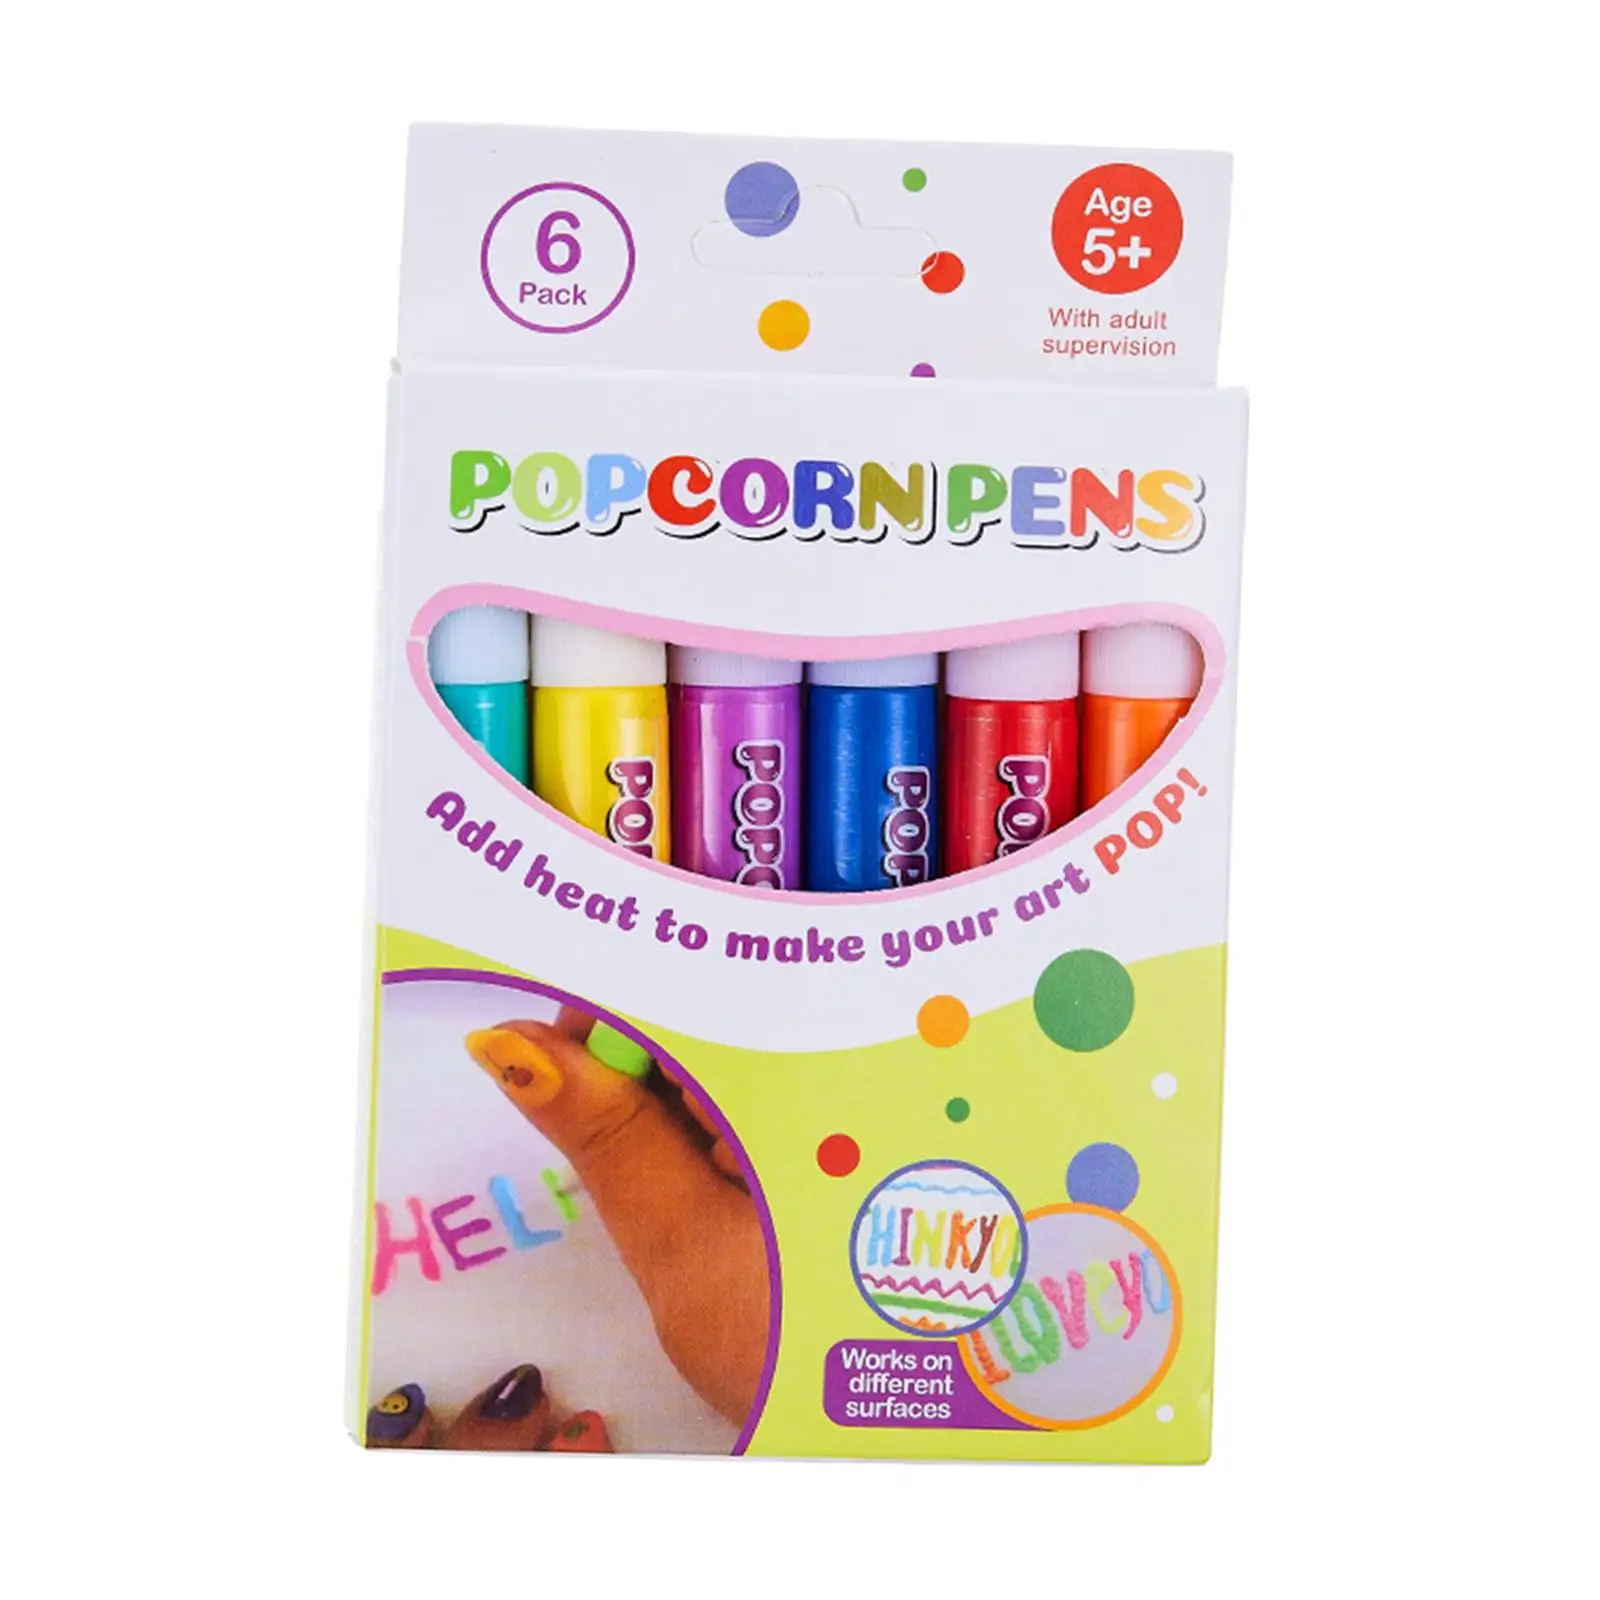 6 Pieces Popcorn Color Paint Pen Boys Girls Pens for Small Arts Illustrating Coloring Books Drawing Decorating Cards